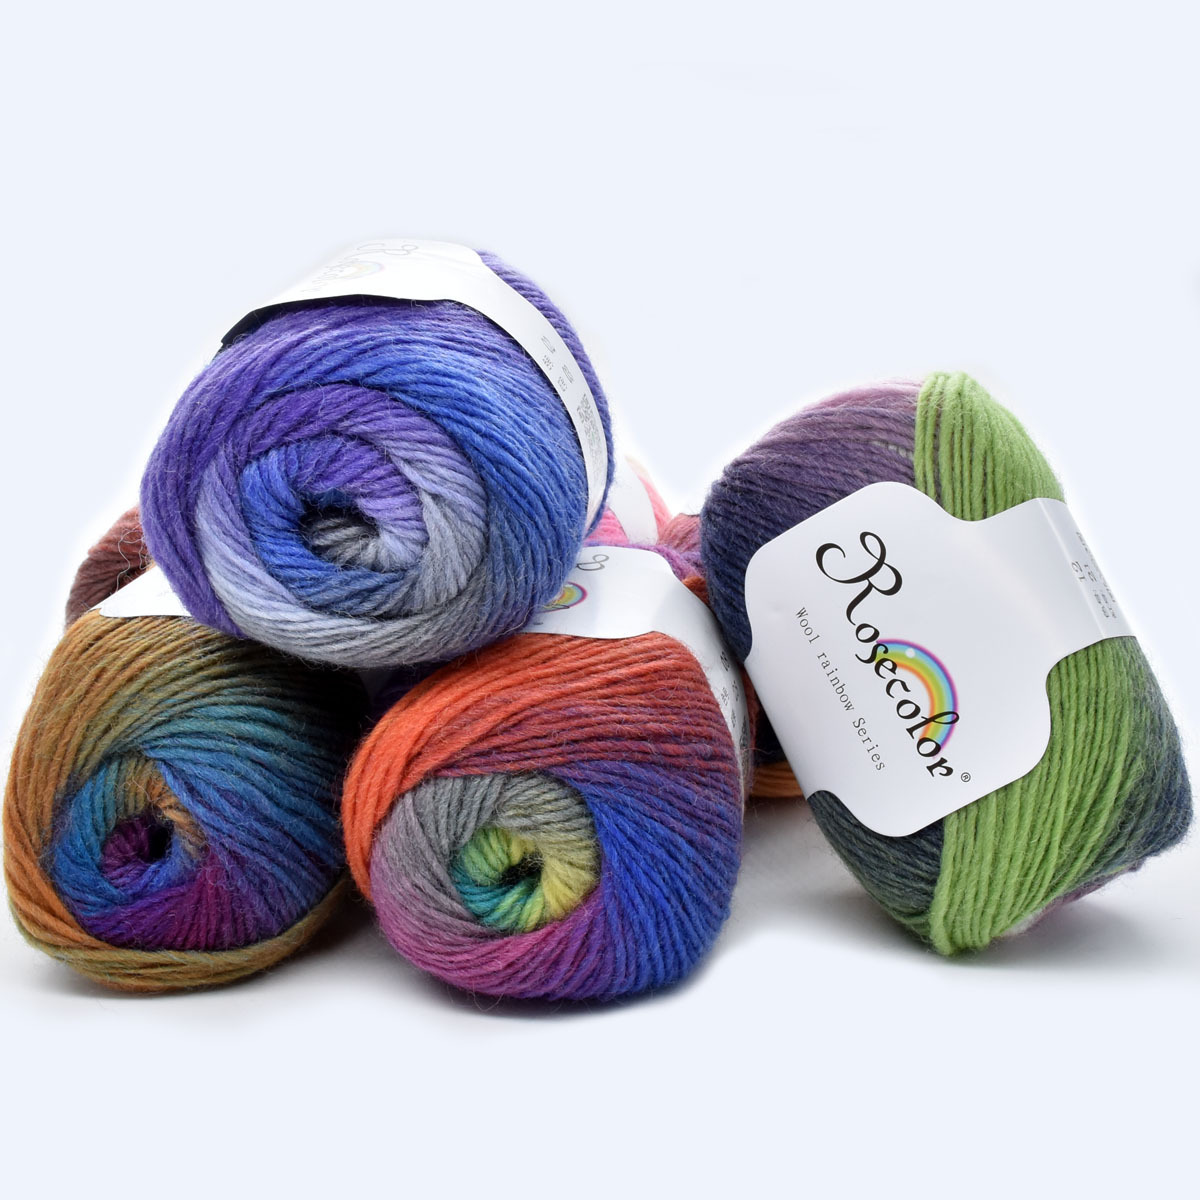 50g/Ball 100% Cotton Lace Rainbow Yarn Colorful Dyeing Gradient